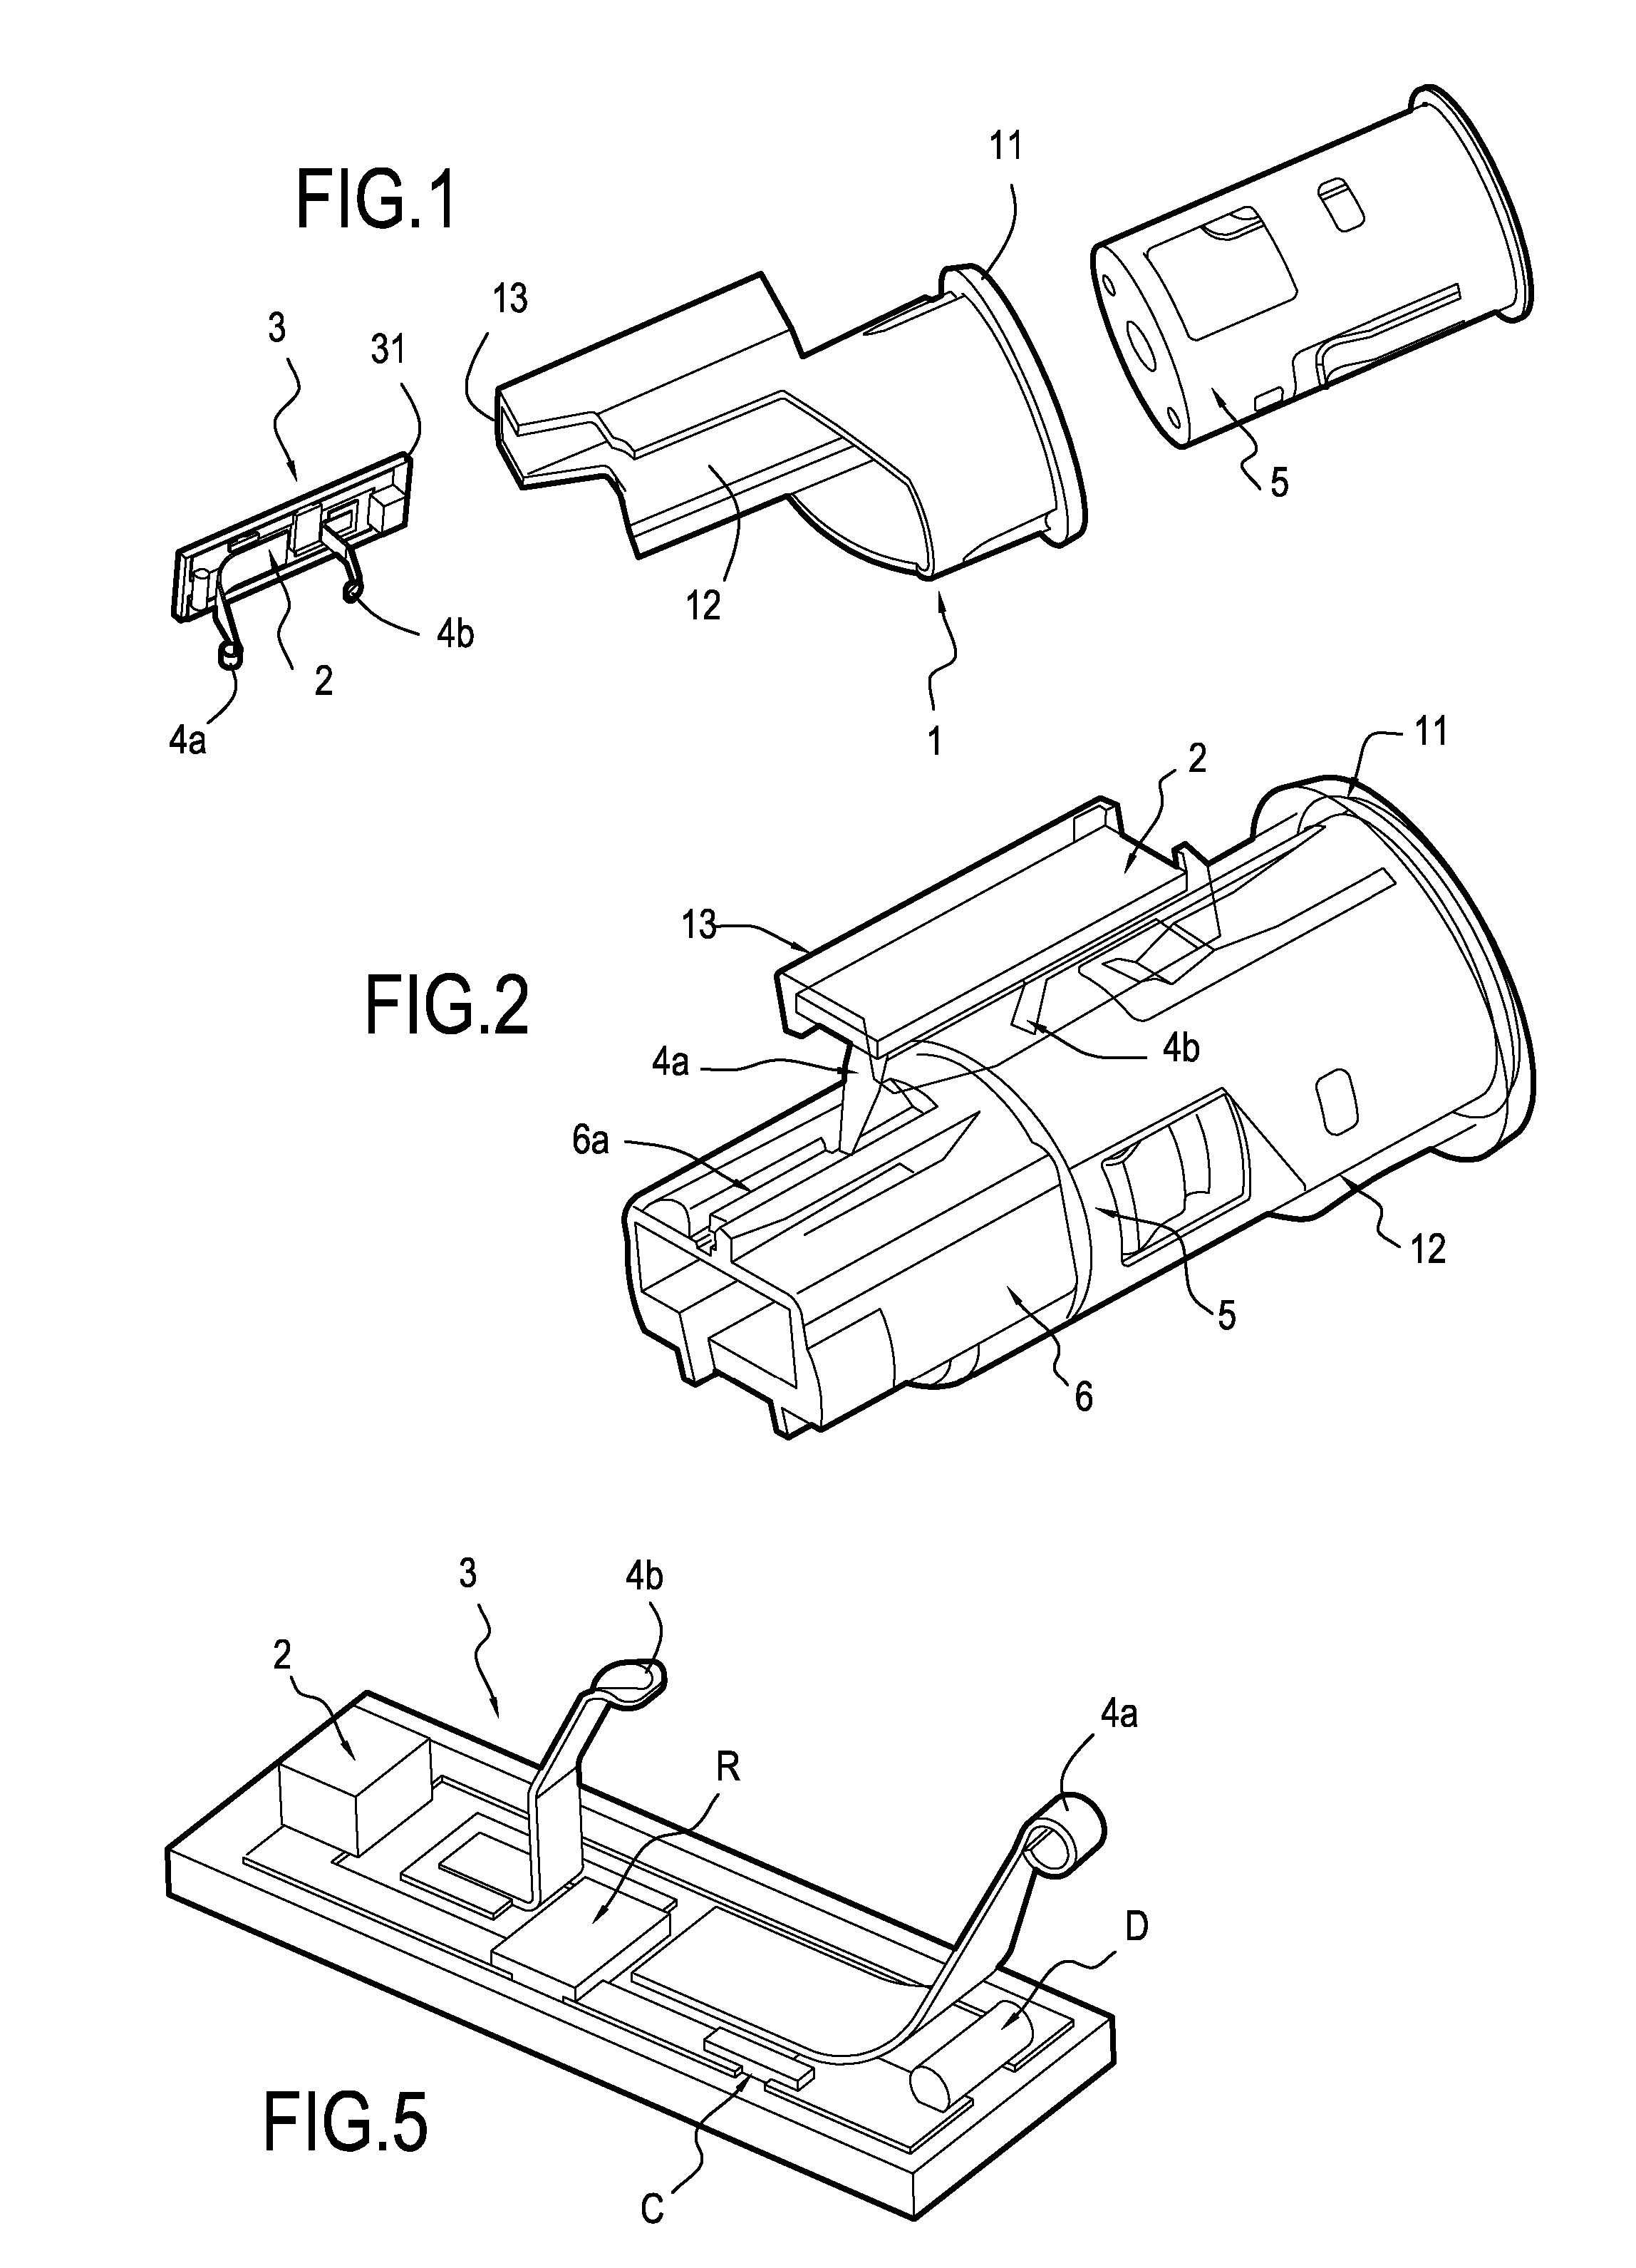 Illumination device for a cigar lighter or multifunction electric socket